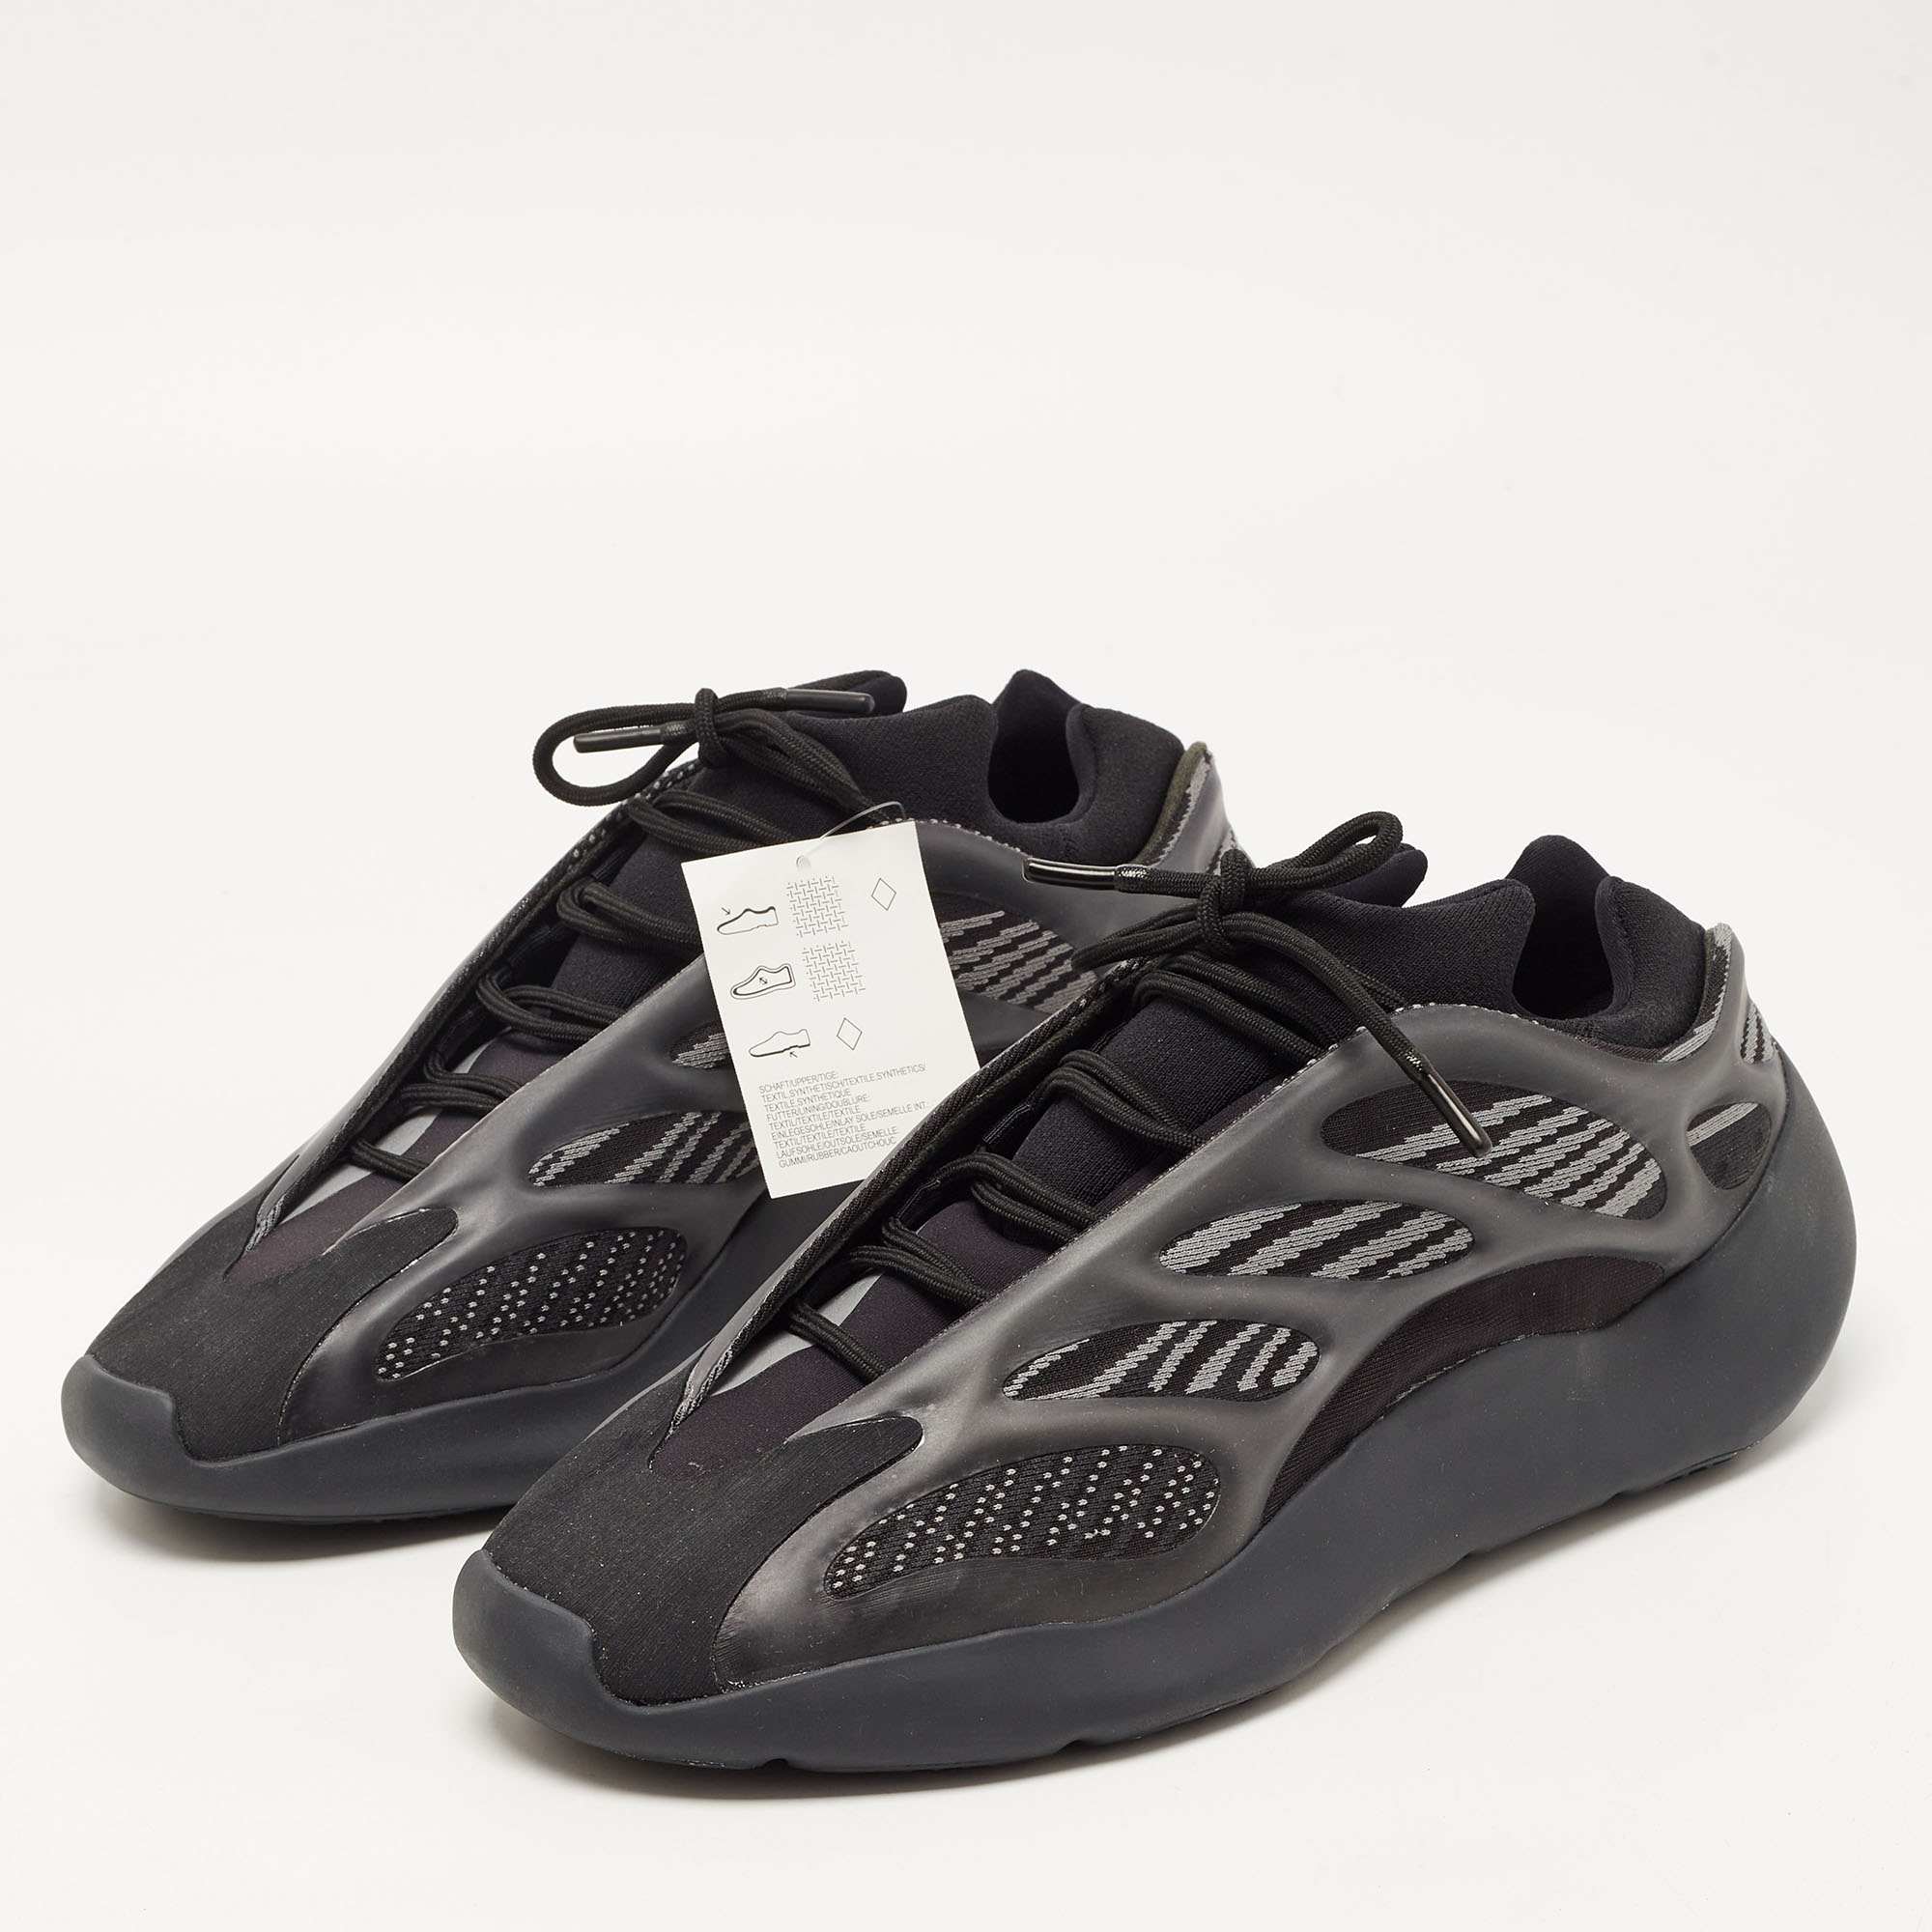 

Yeezy x adidas Black Rubber and Fabric Yeezy 700 V3 alvah Sneakers Size